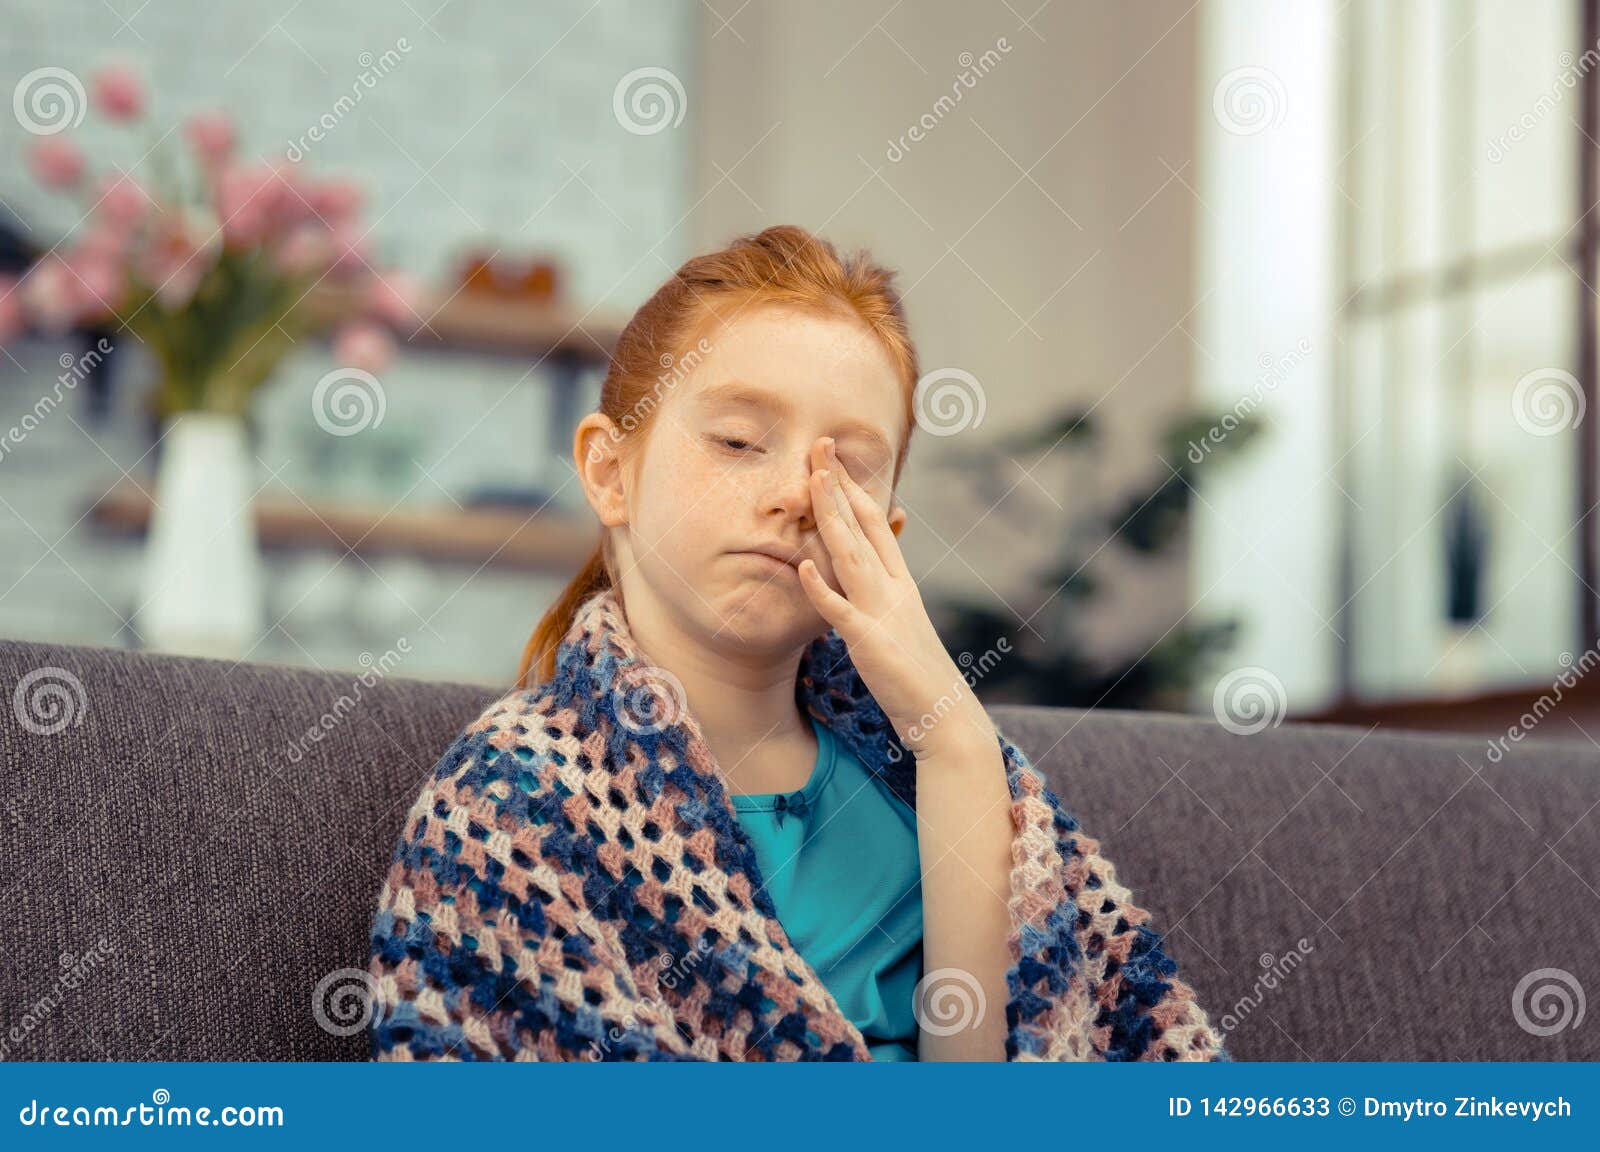 cheerless pale young girl rubbing her face